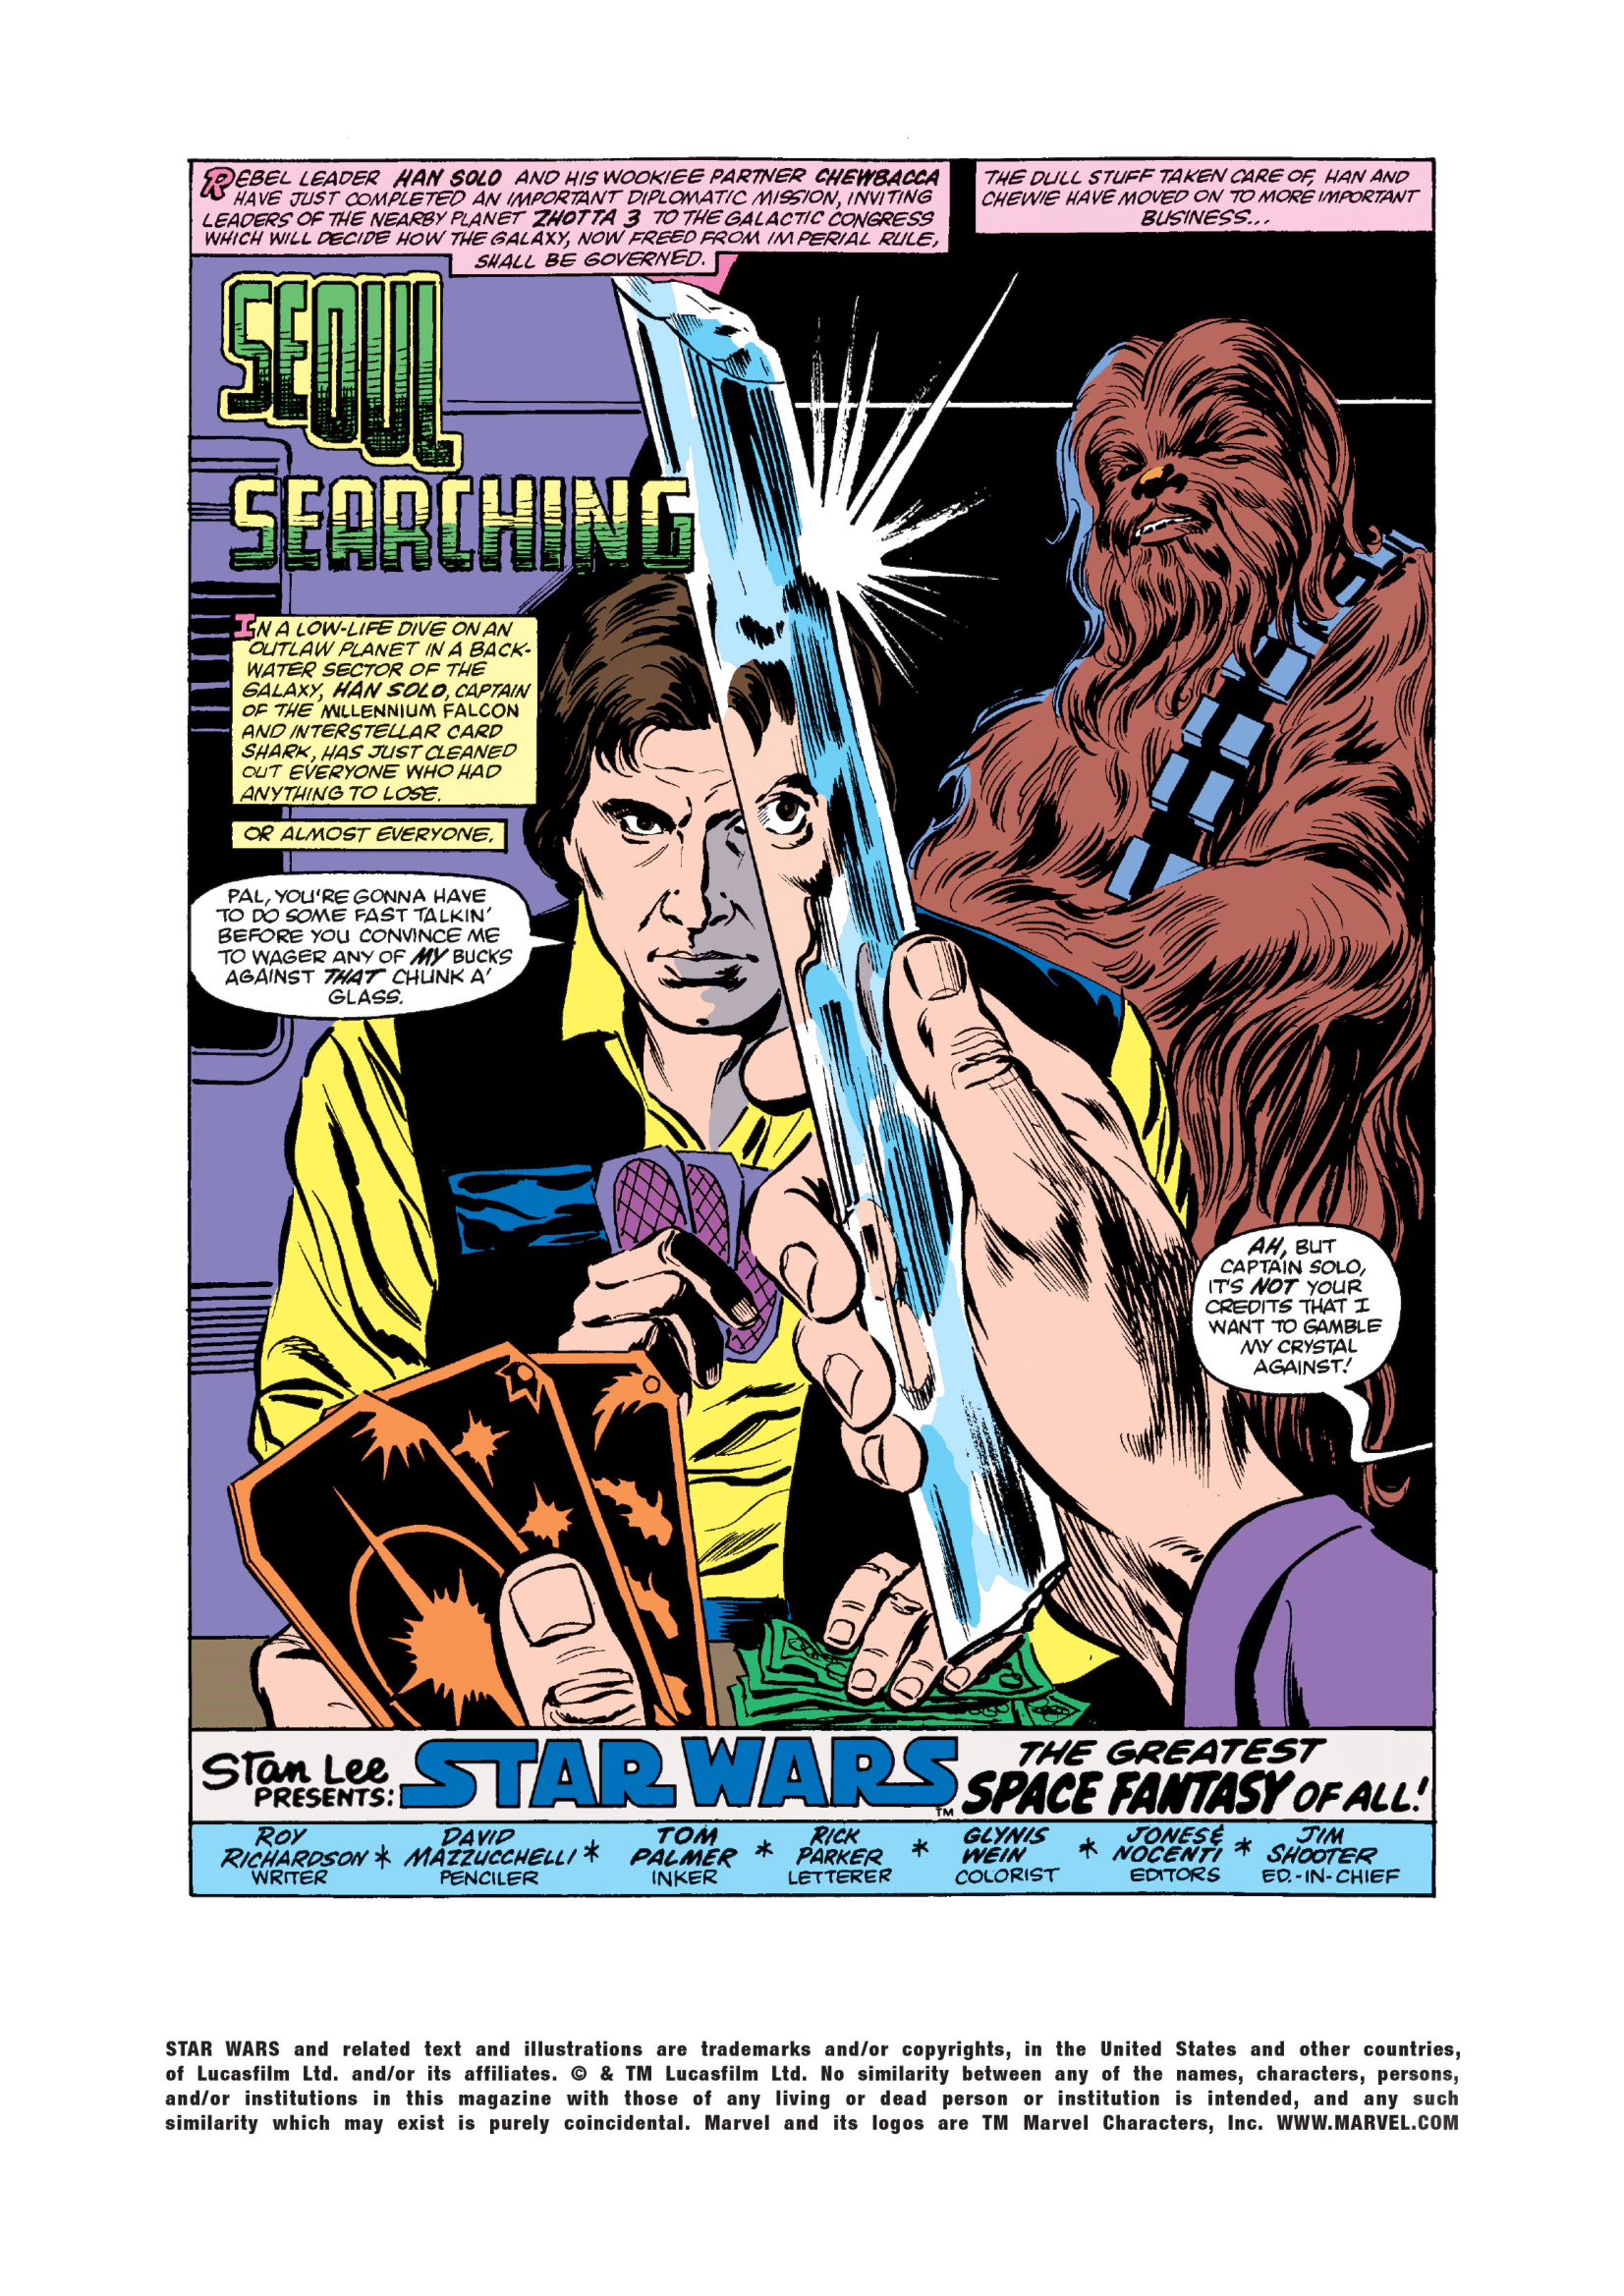 Star Wars (1977) Issue #_84 - Read Star Wars (1977) Issue #_84 comic online in high quality-04.png